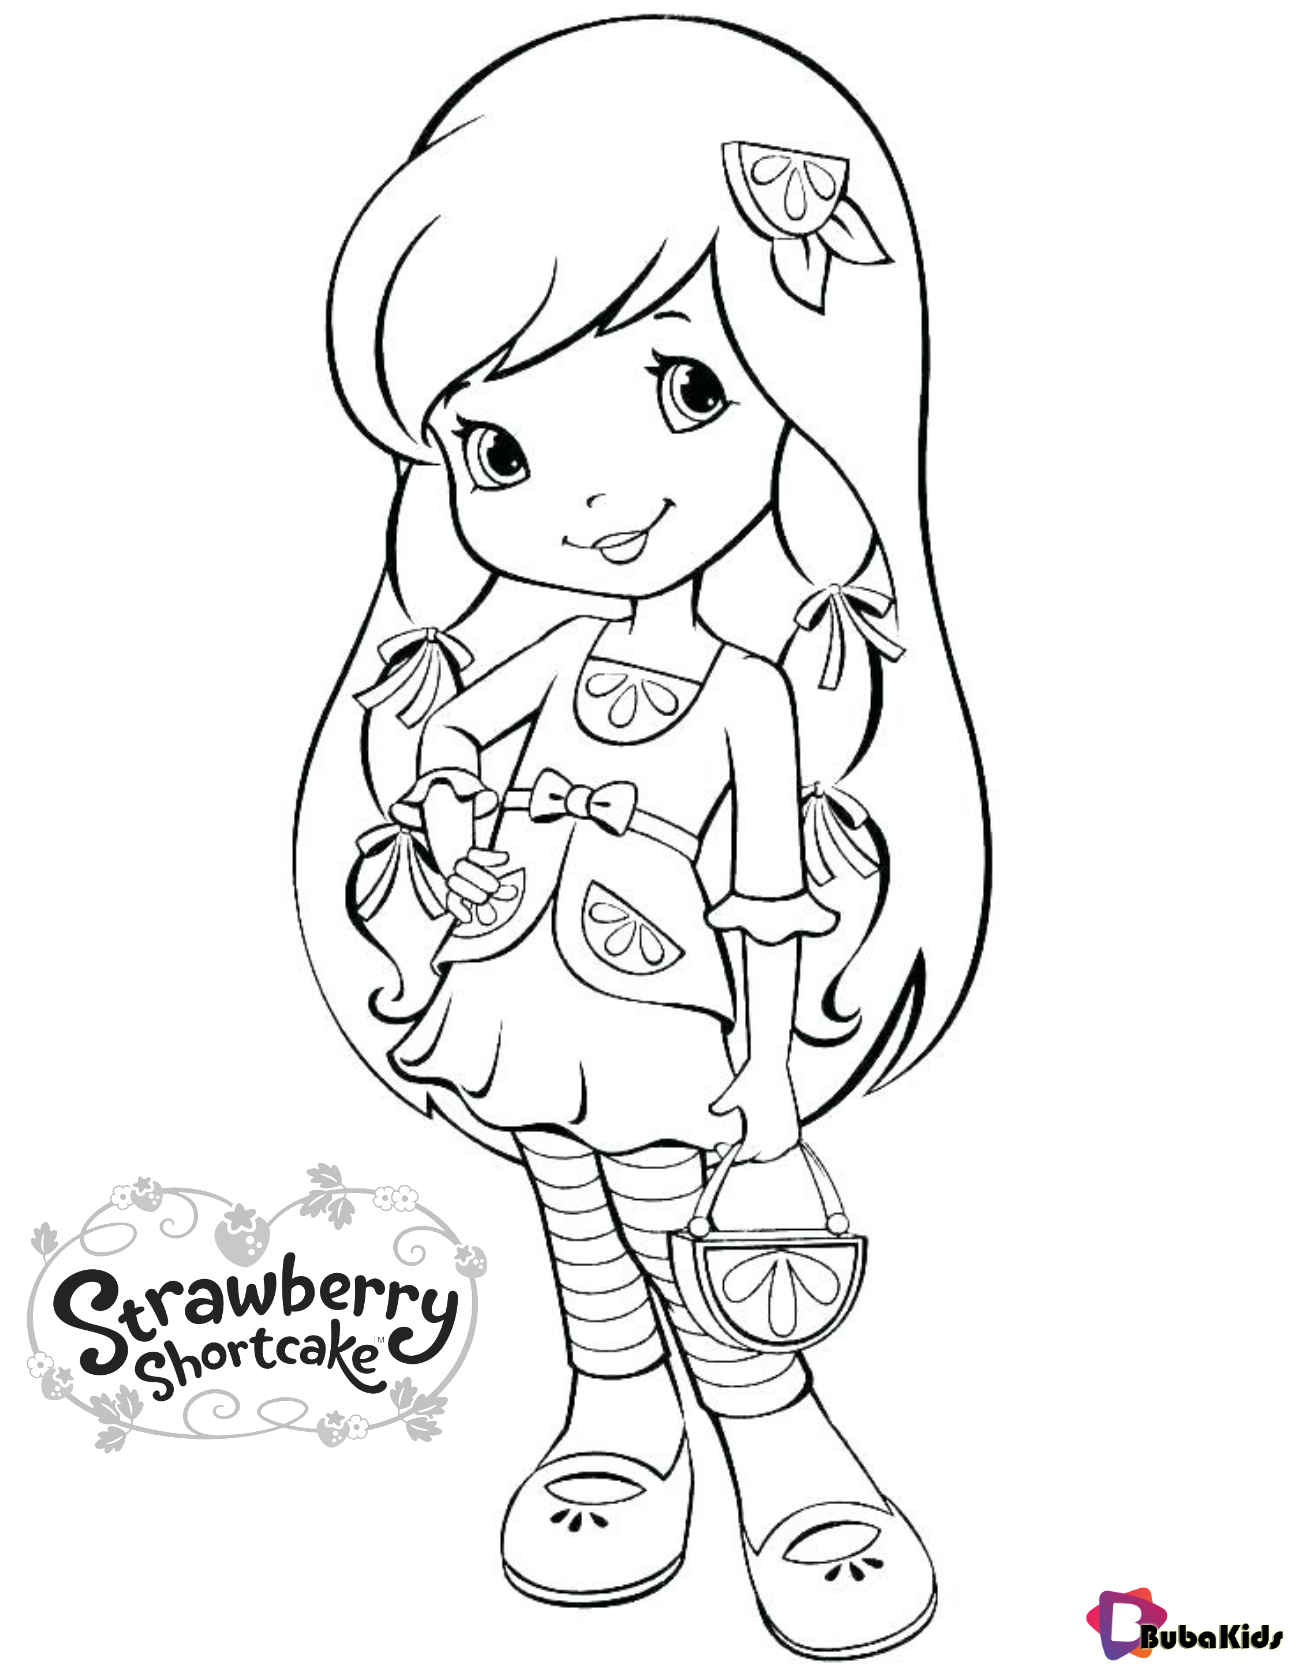 Plum Pudding Strawberry Shortcake character free printable coloring page. Wallpaper